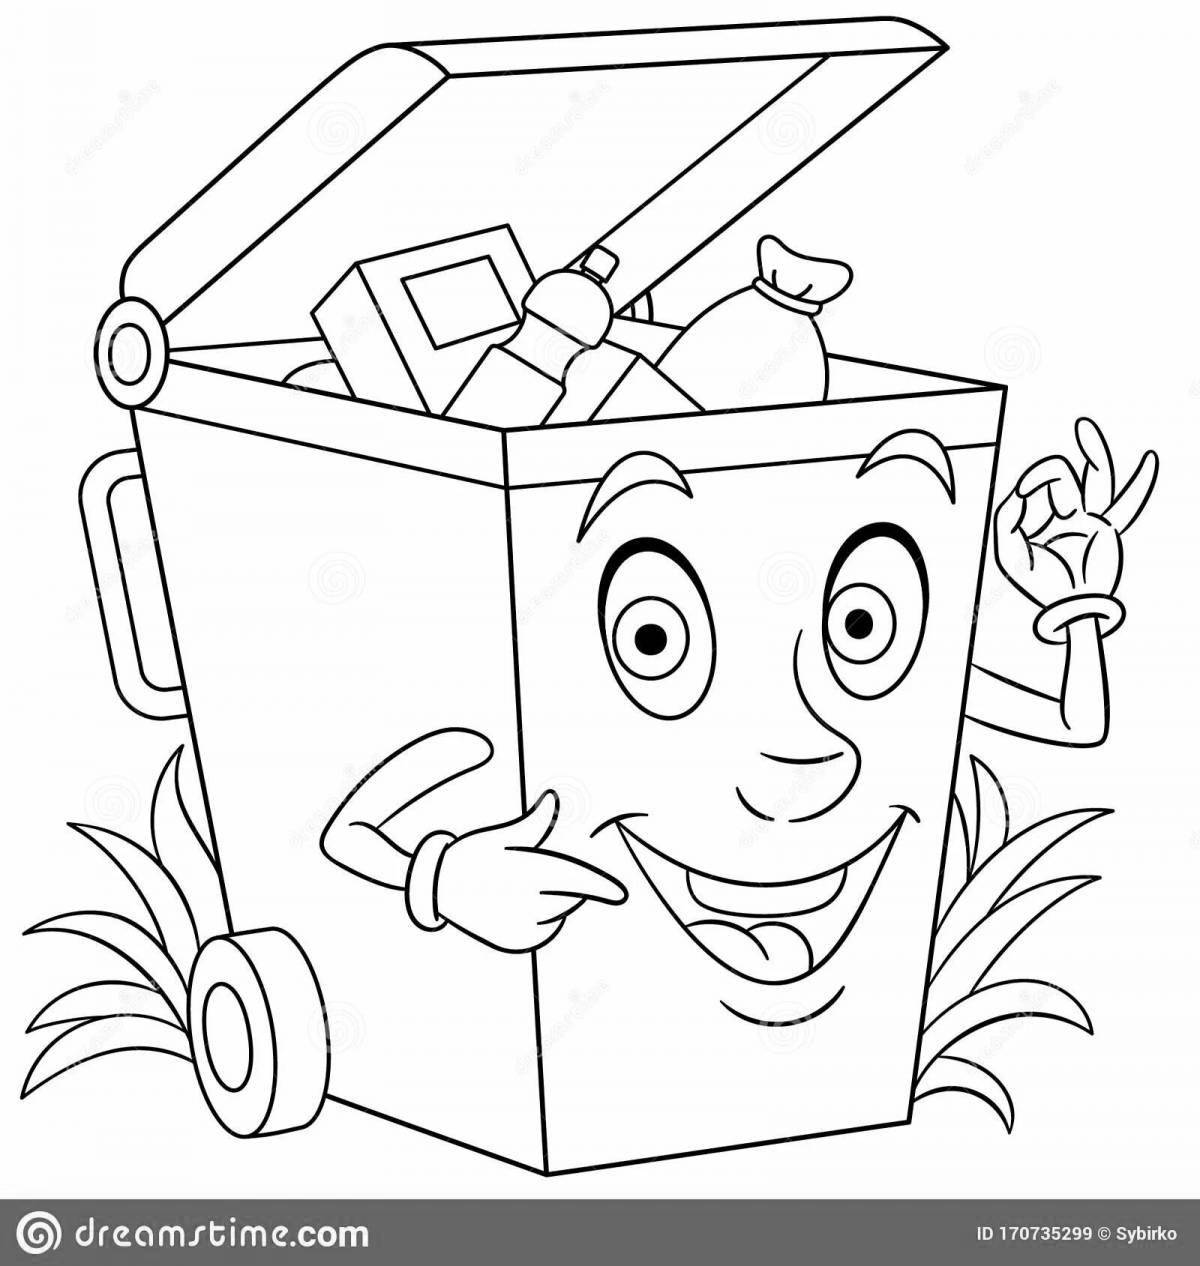 Coloring book for children on waste sorting